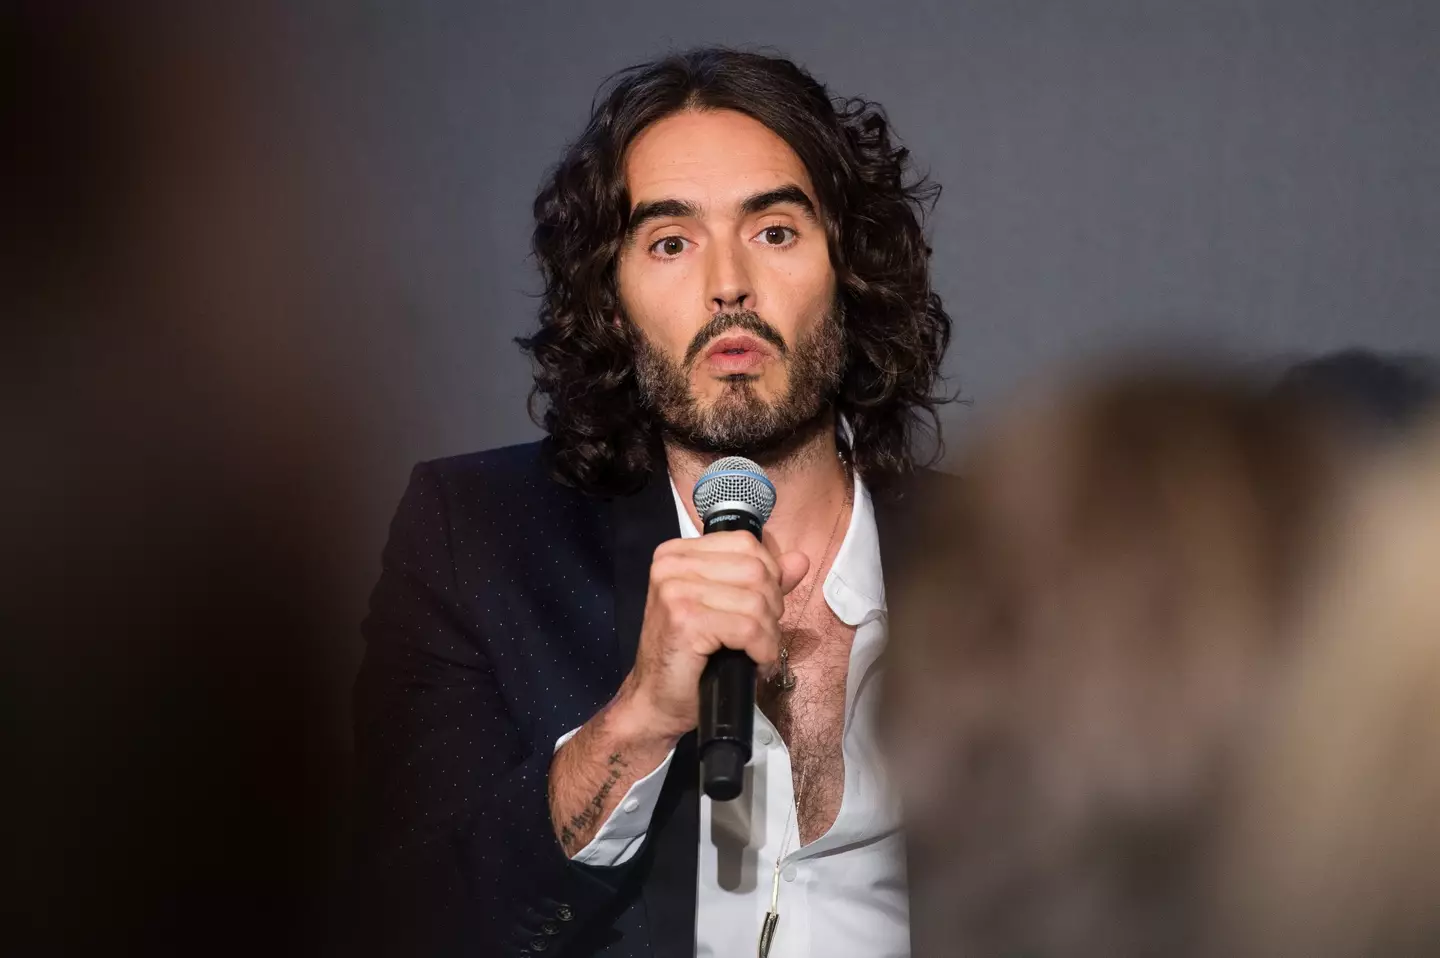 Russell Brand has been accused of rape and sexual assault by multiple women.